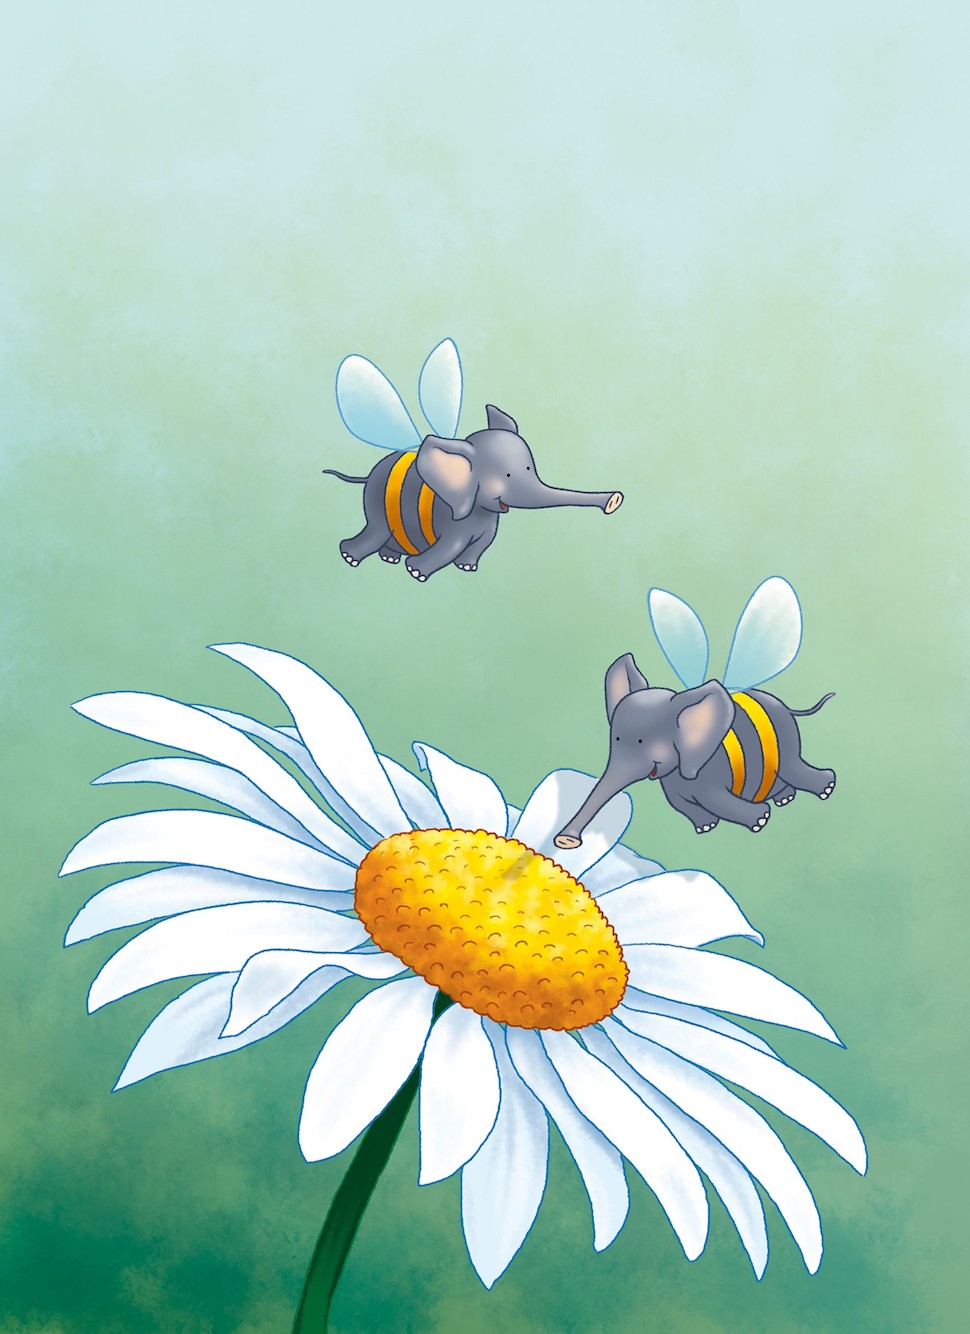 Robin Davies Illustration of elephant bees and daisies